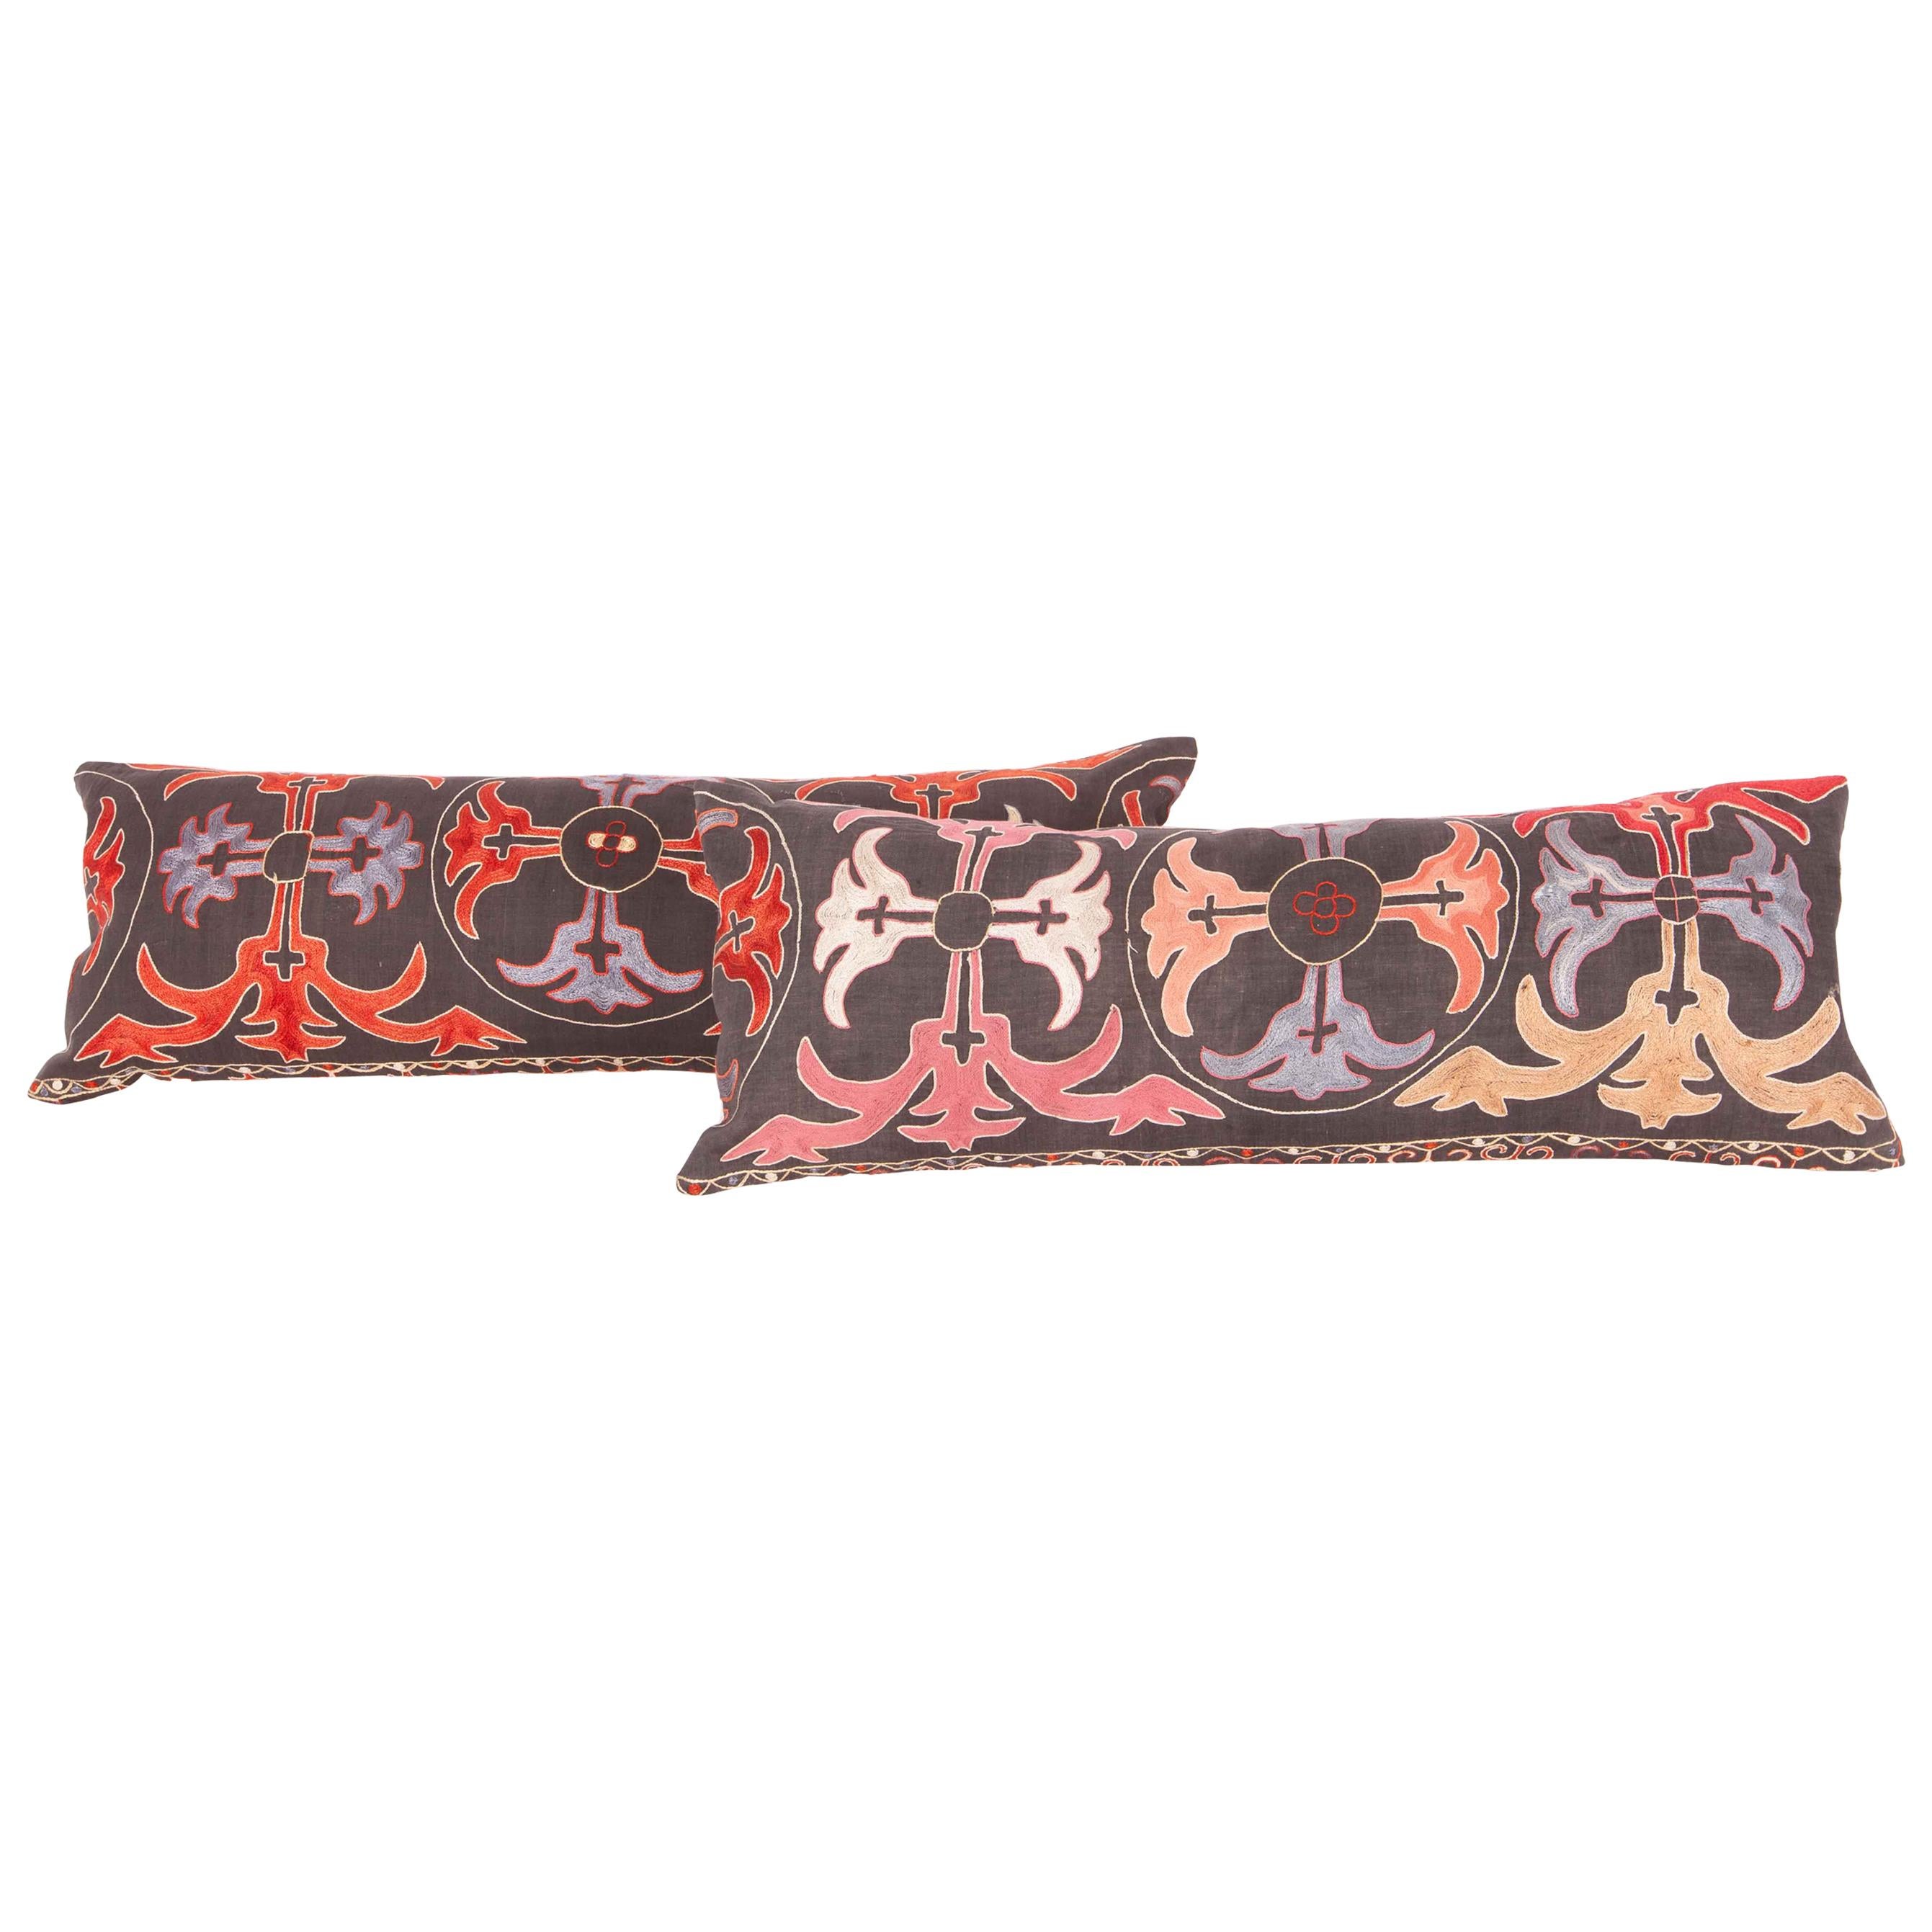 Vintage  Pillow Cases fashioned from a Kyrgyz or Kazak Embroidery For Sale